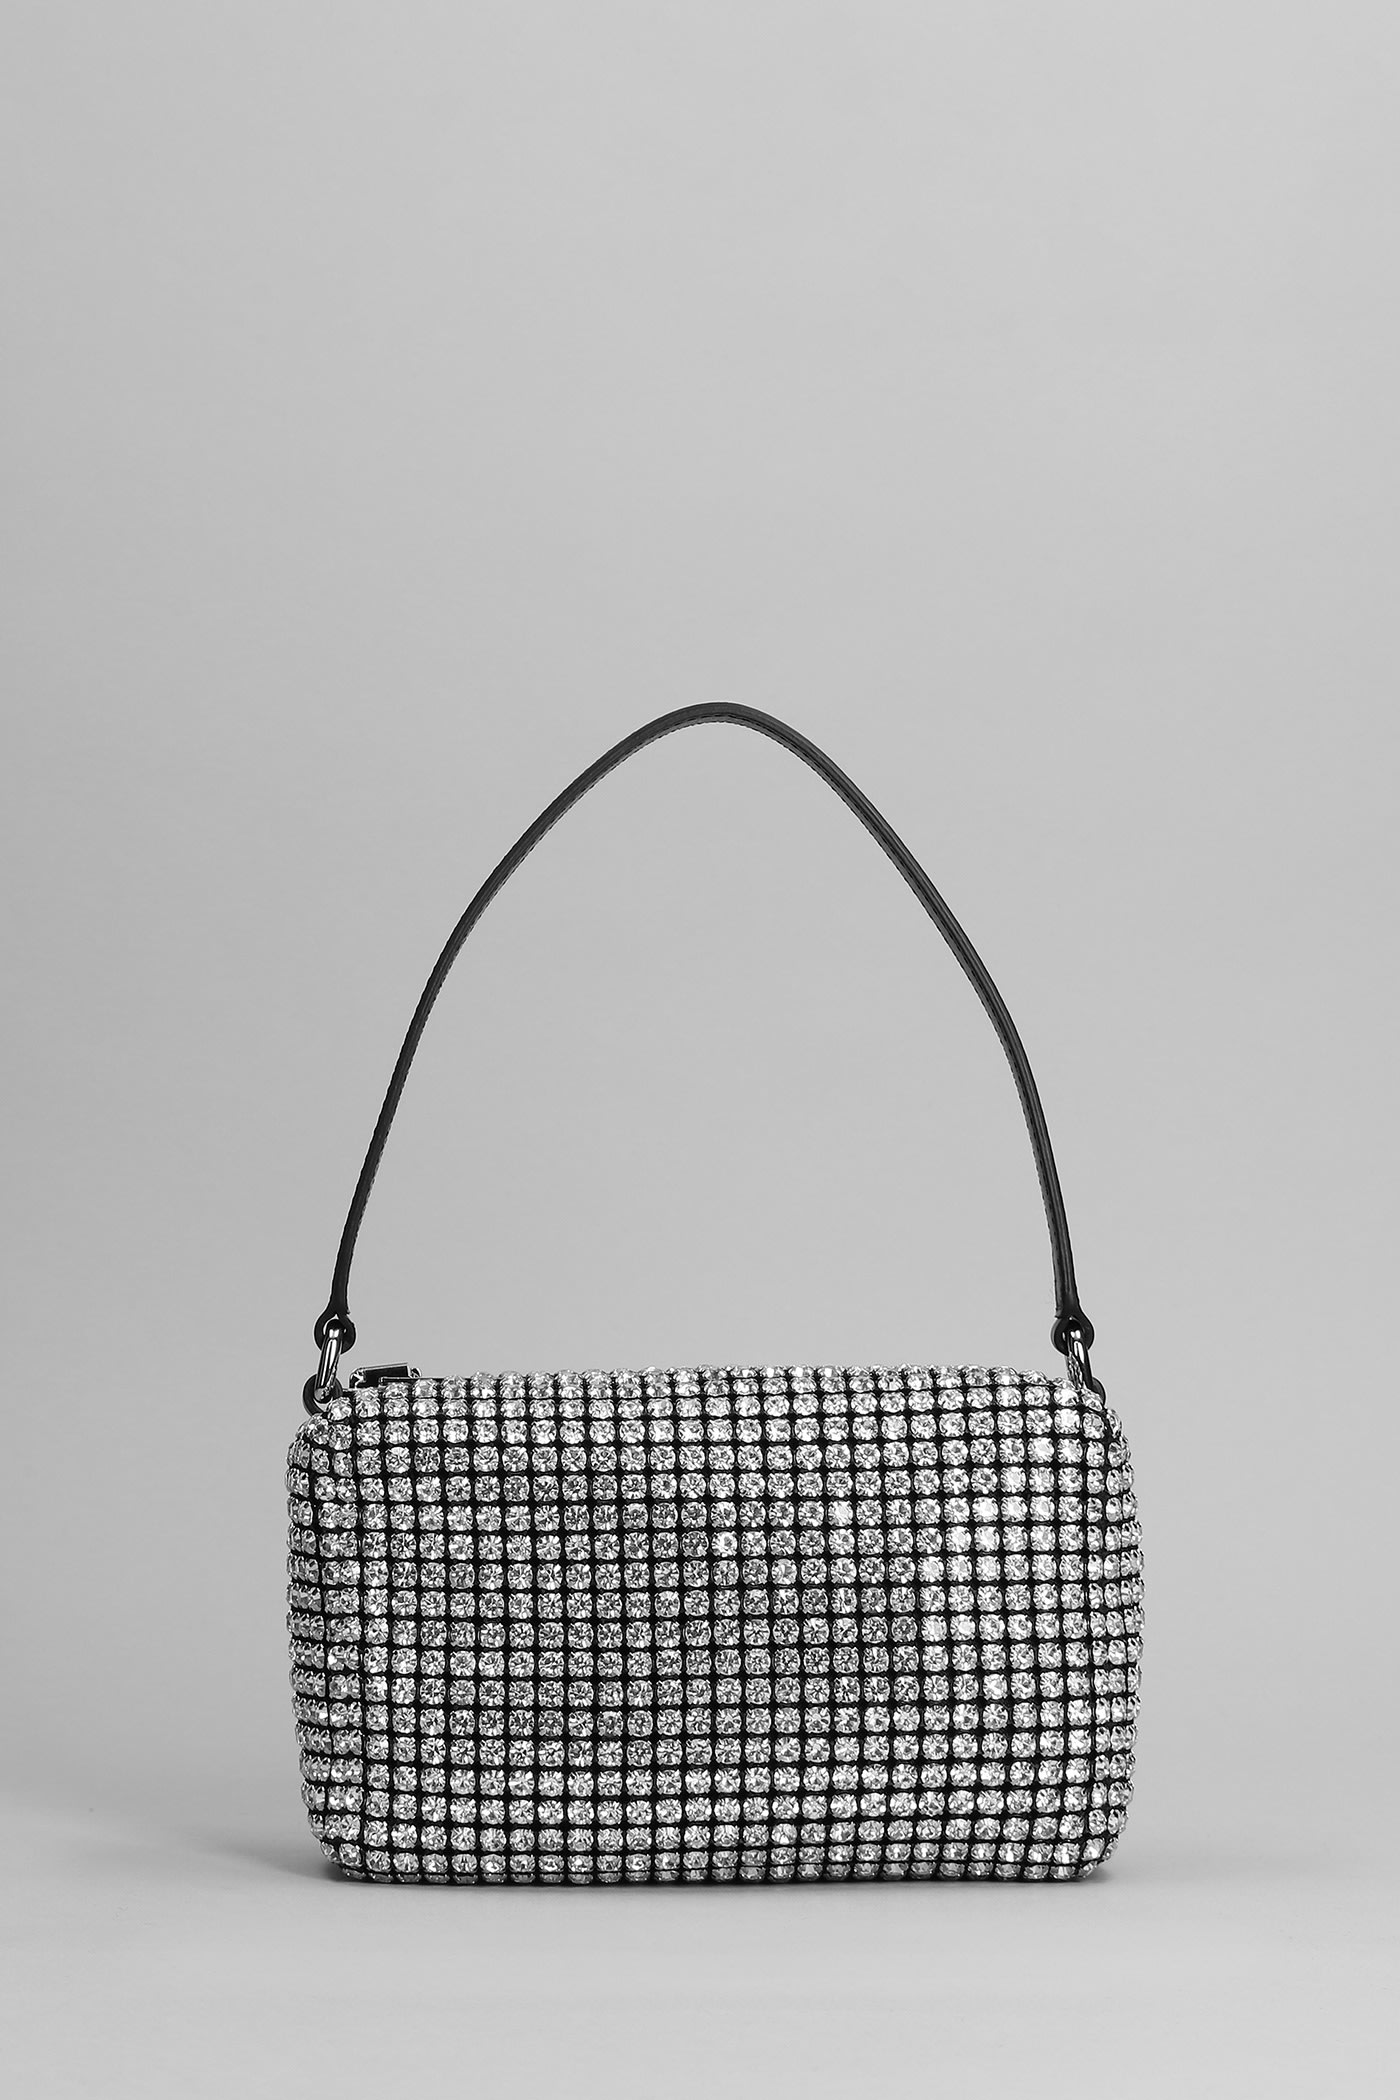 Heiress Hand Bag In White Leather